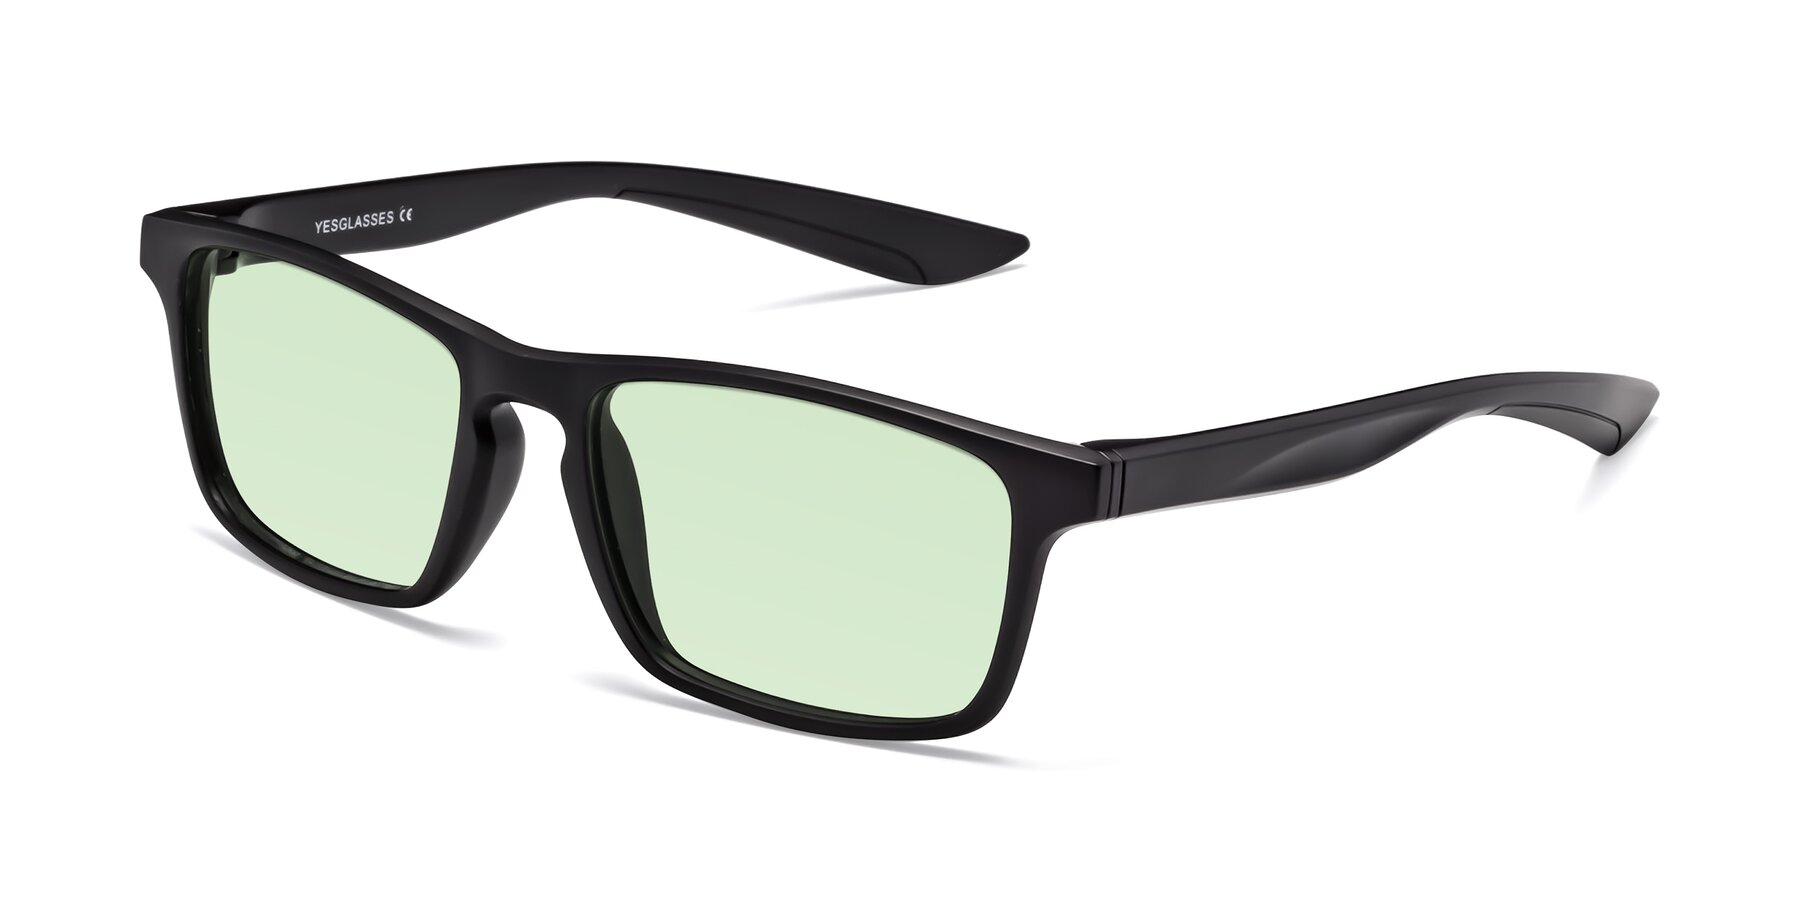 Angle of Passion in Matte Black with Light Green Tinted Lenses